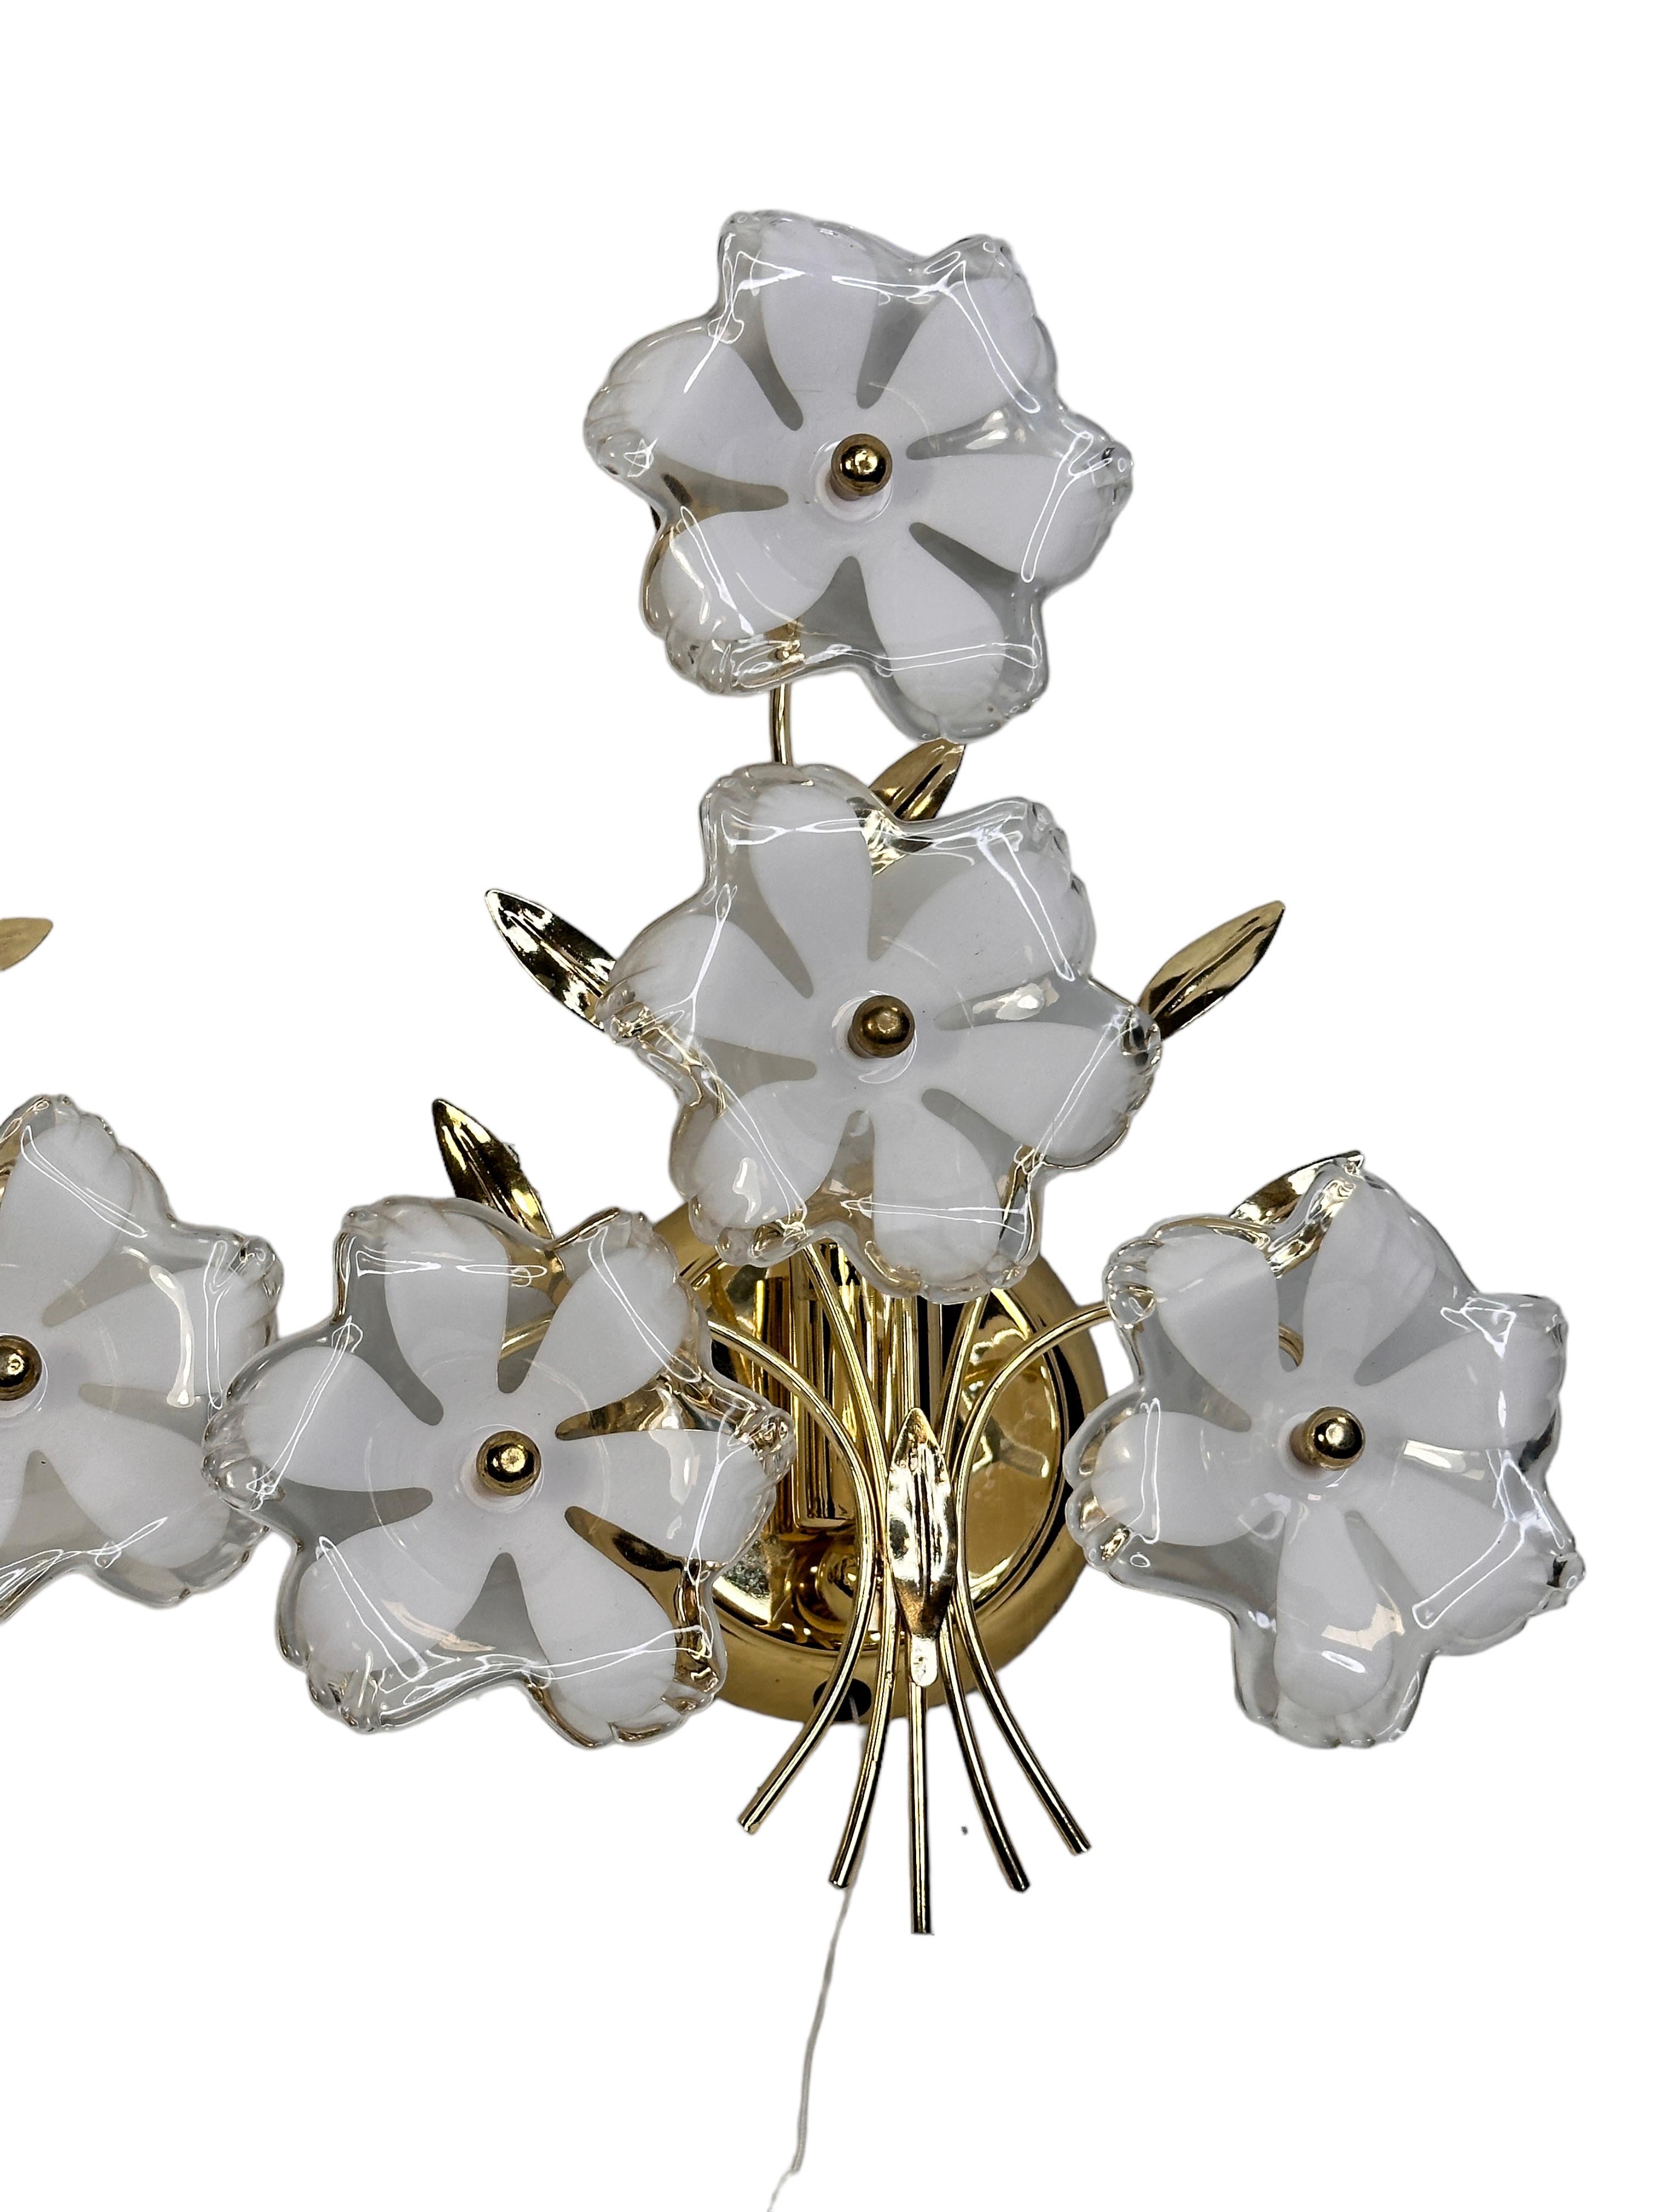 Italian Pair of Floral Murano Sconces, Vintage Brass Wall Lights, 1970s Italy